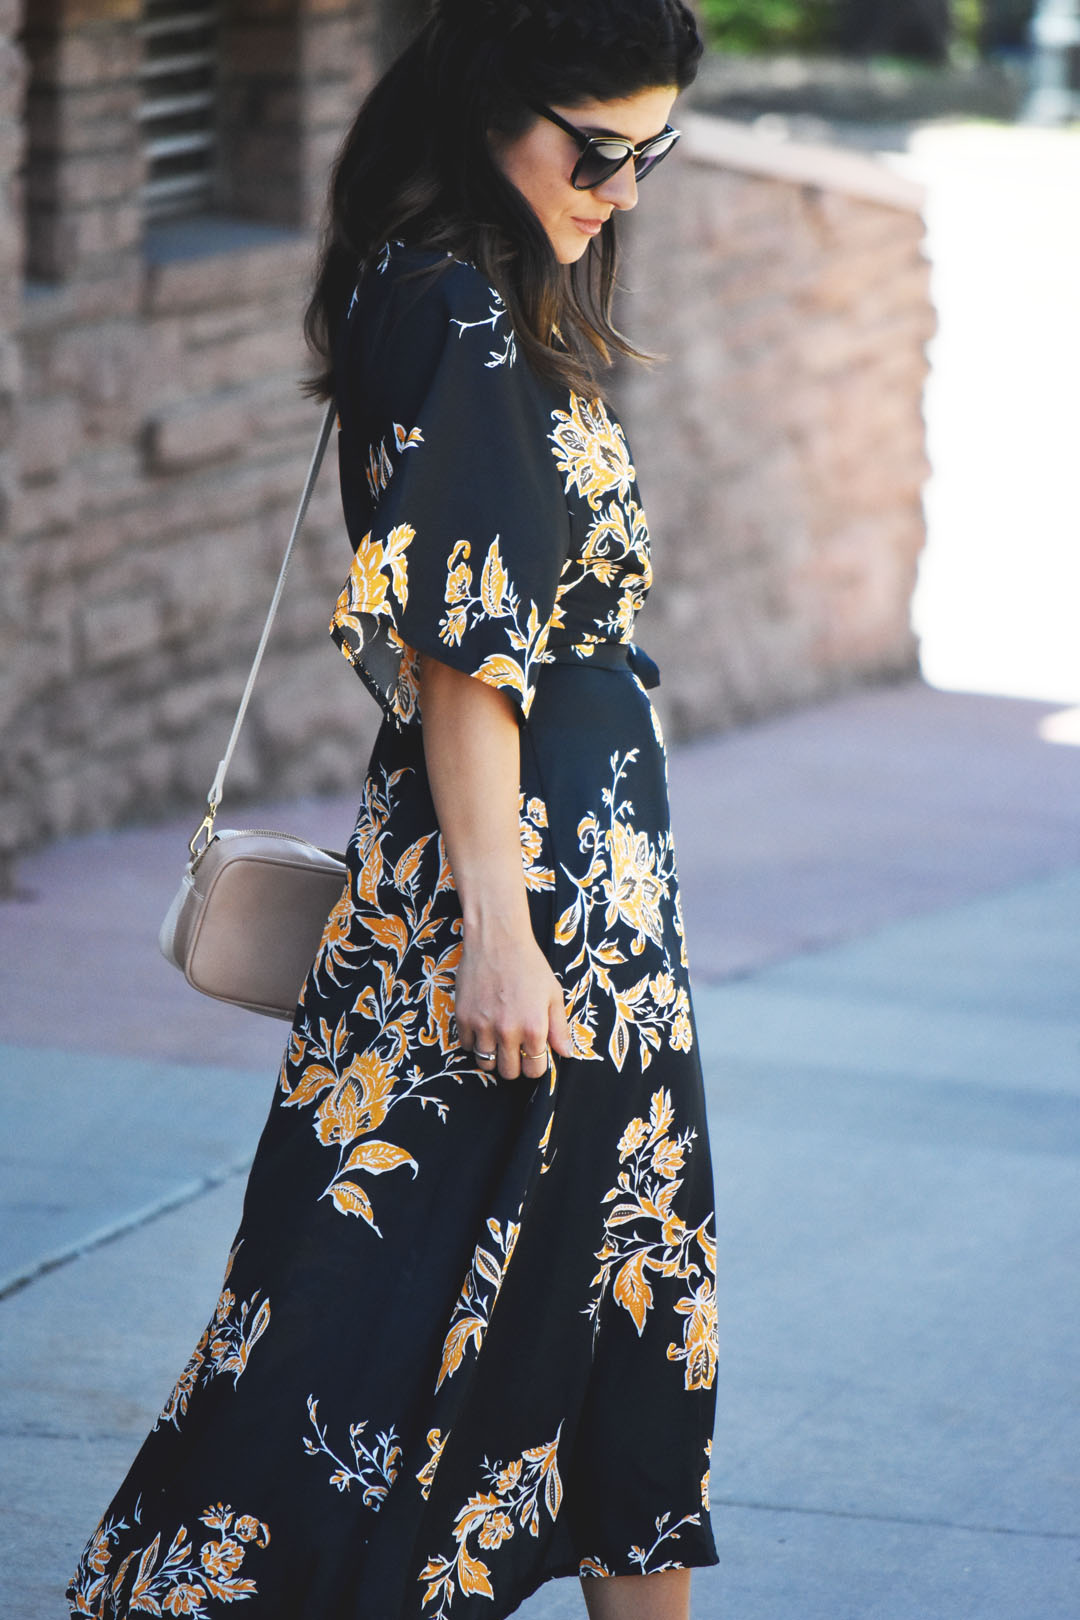 Carolina Hellal of Chic Talk wearing a floral wrap maxi dress, Nordstrom sunglasses, and Pueblo L.A dainty gold rings.